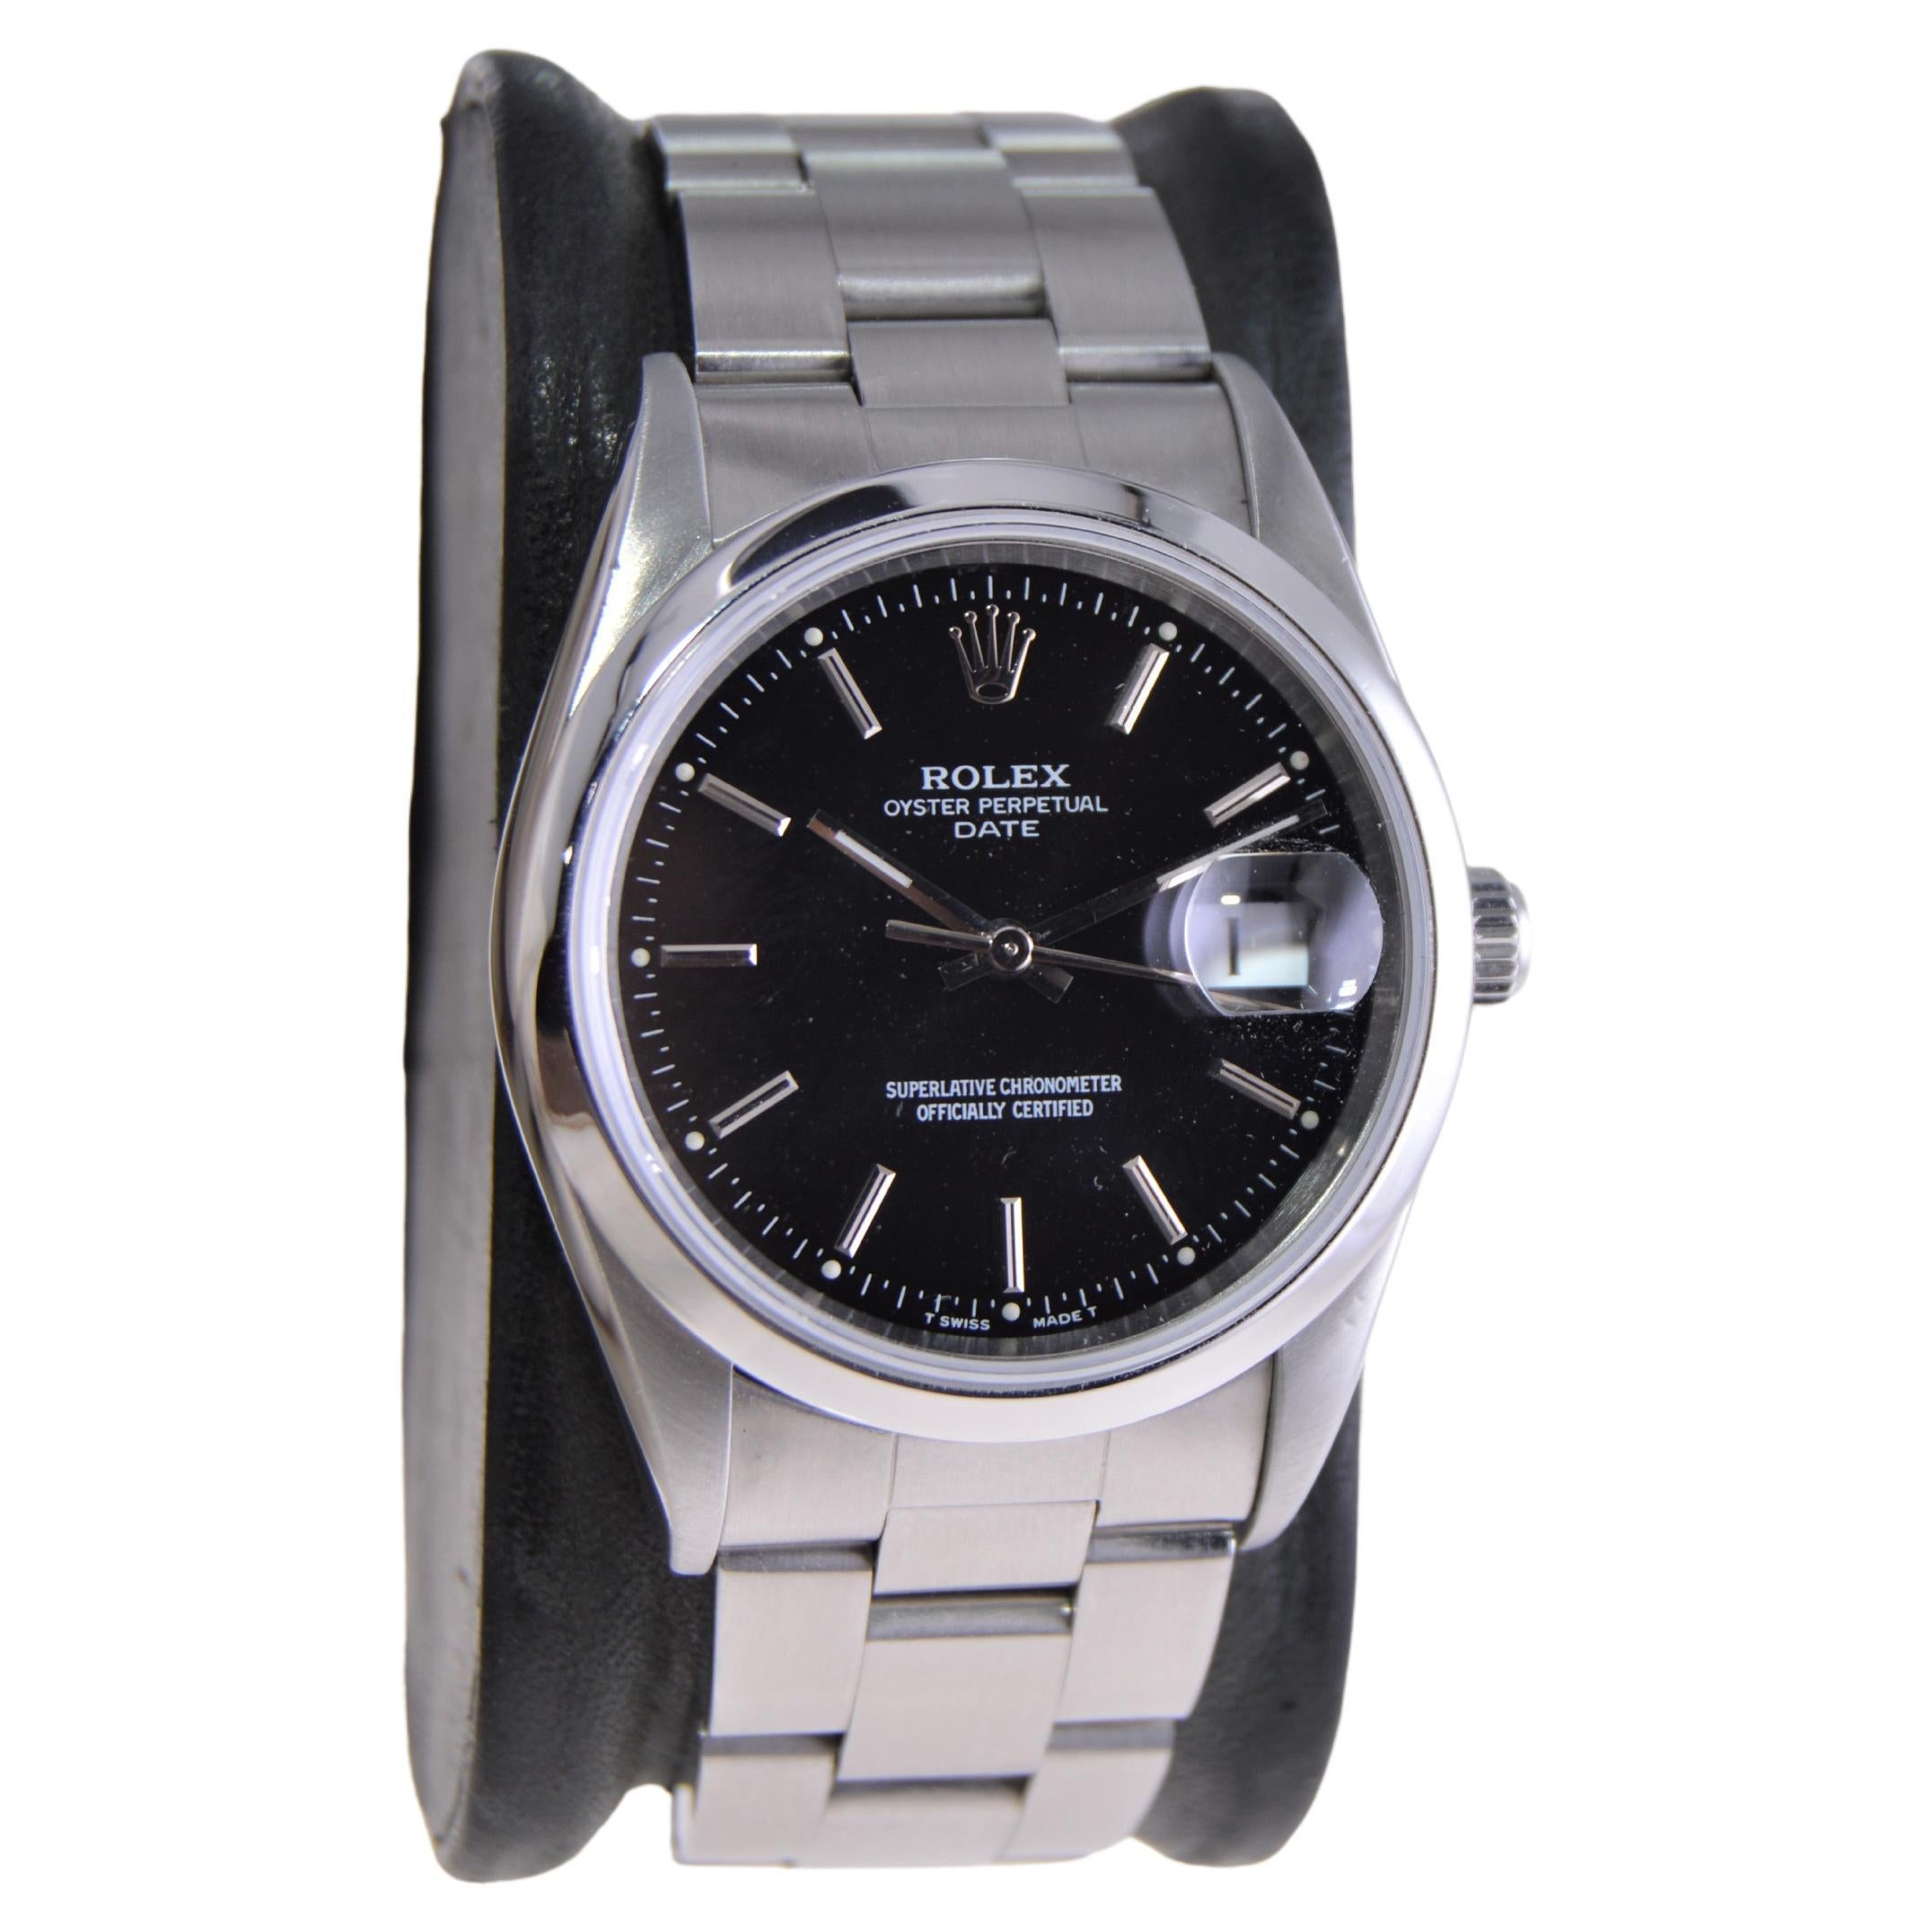 FACTORY / HOUSE: Rolex Watch Company
STYLE / REFERENCE: Oyster Perpetual Date / Reference 15200
METAL / MATERIAL: Stainless Steel
CIRCA / YEAR: 1995
DIMENSIONS / SIZE:  Length 43mm  X Diameter 35mm 
MOVEMENT / CALIBER: Perpetual Winding / 26 Jewels